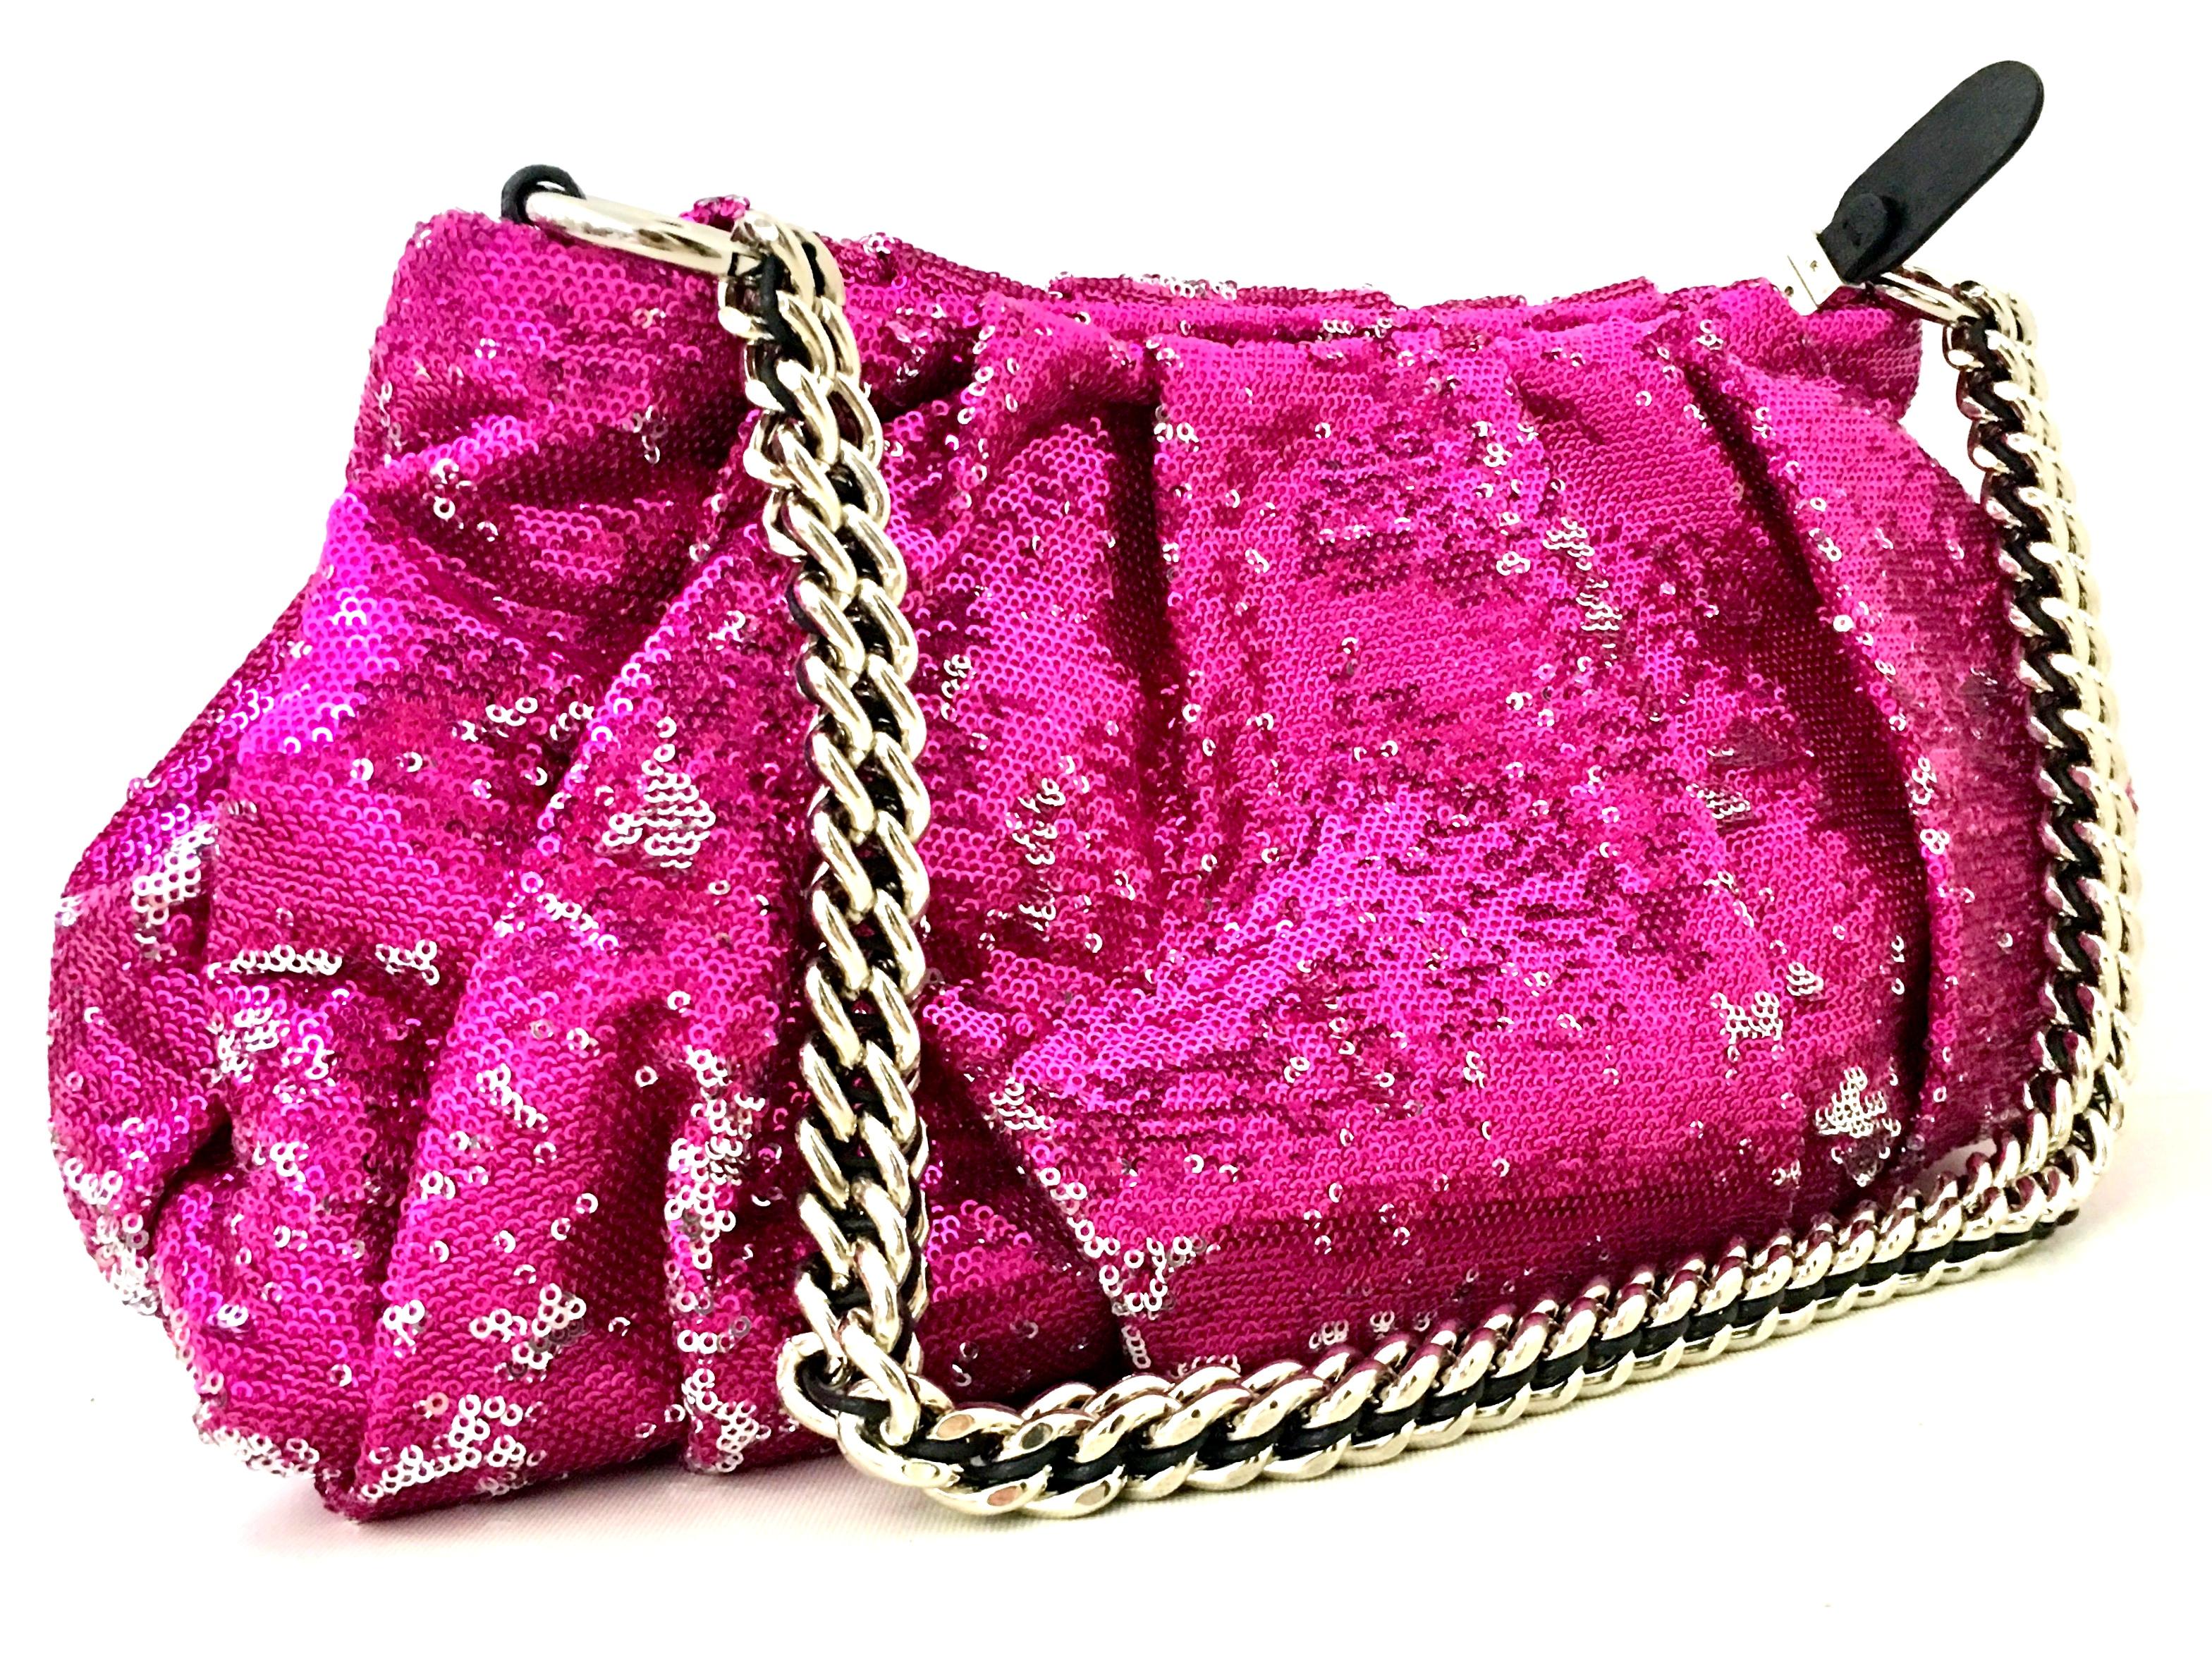 Women's or Men's 21st Century Contemporary Sequin, Leather & Chrome Hand Bag By, OrYanny